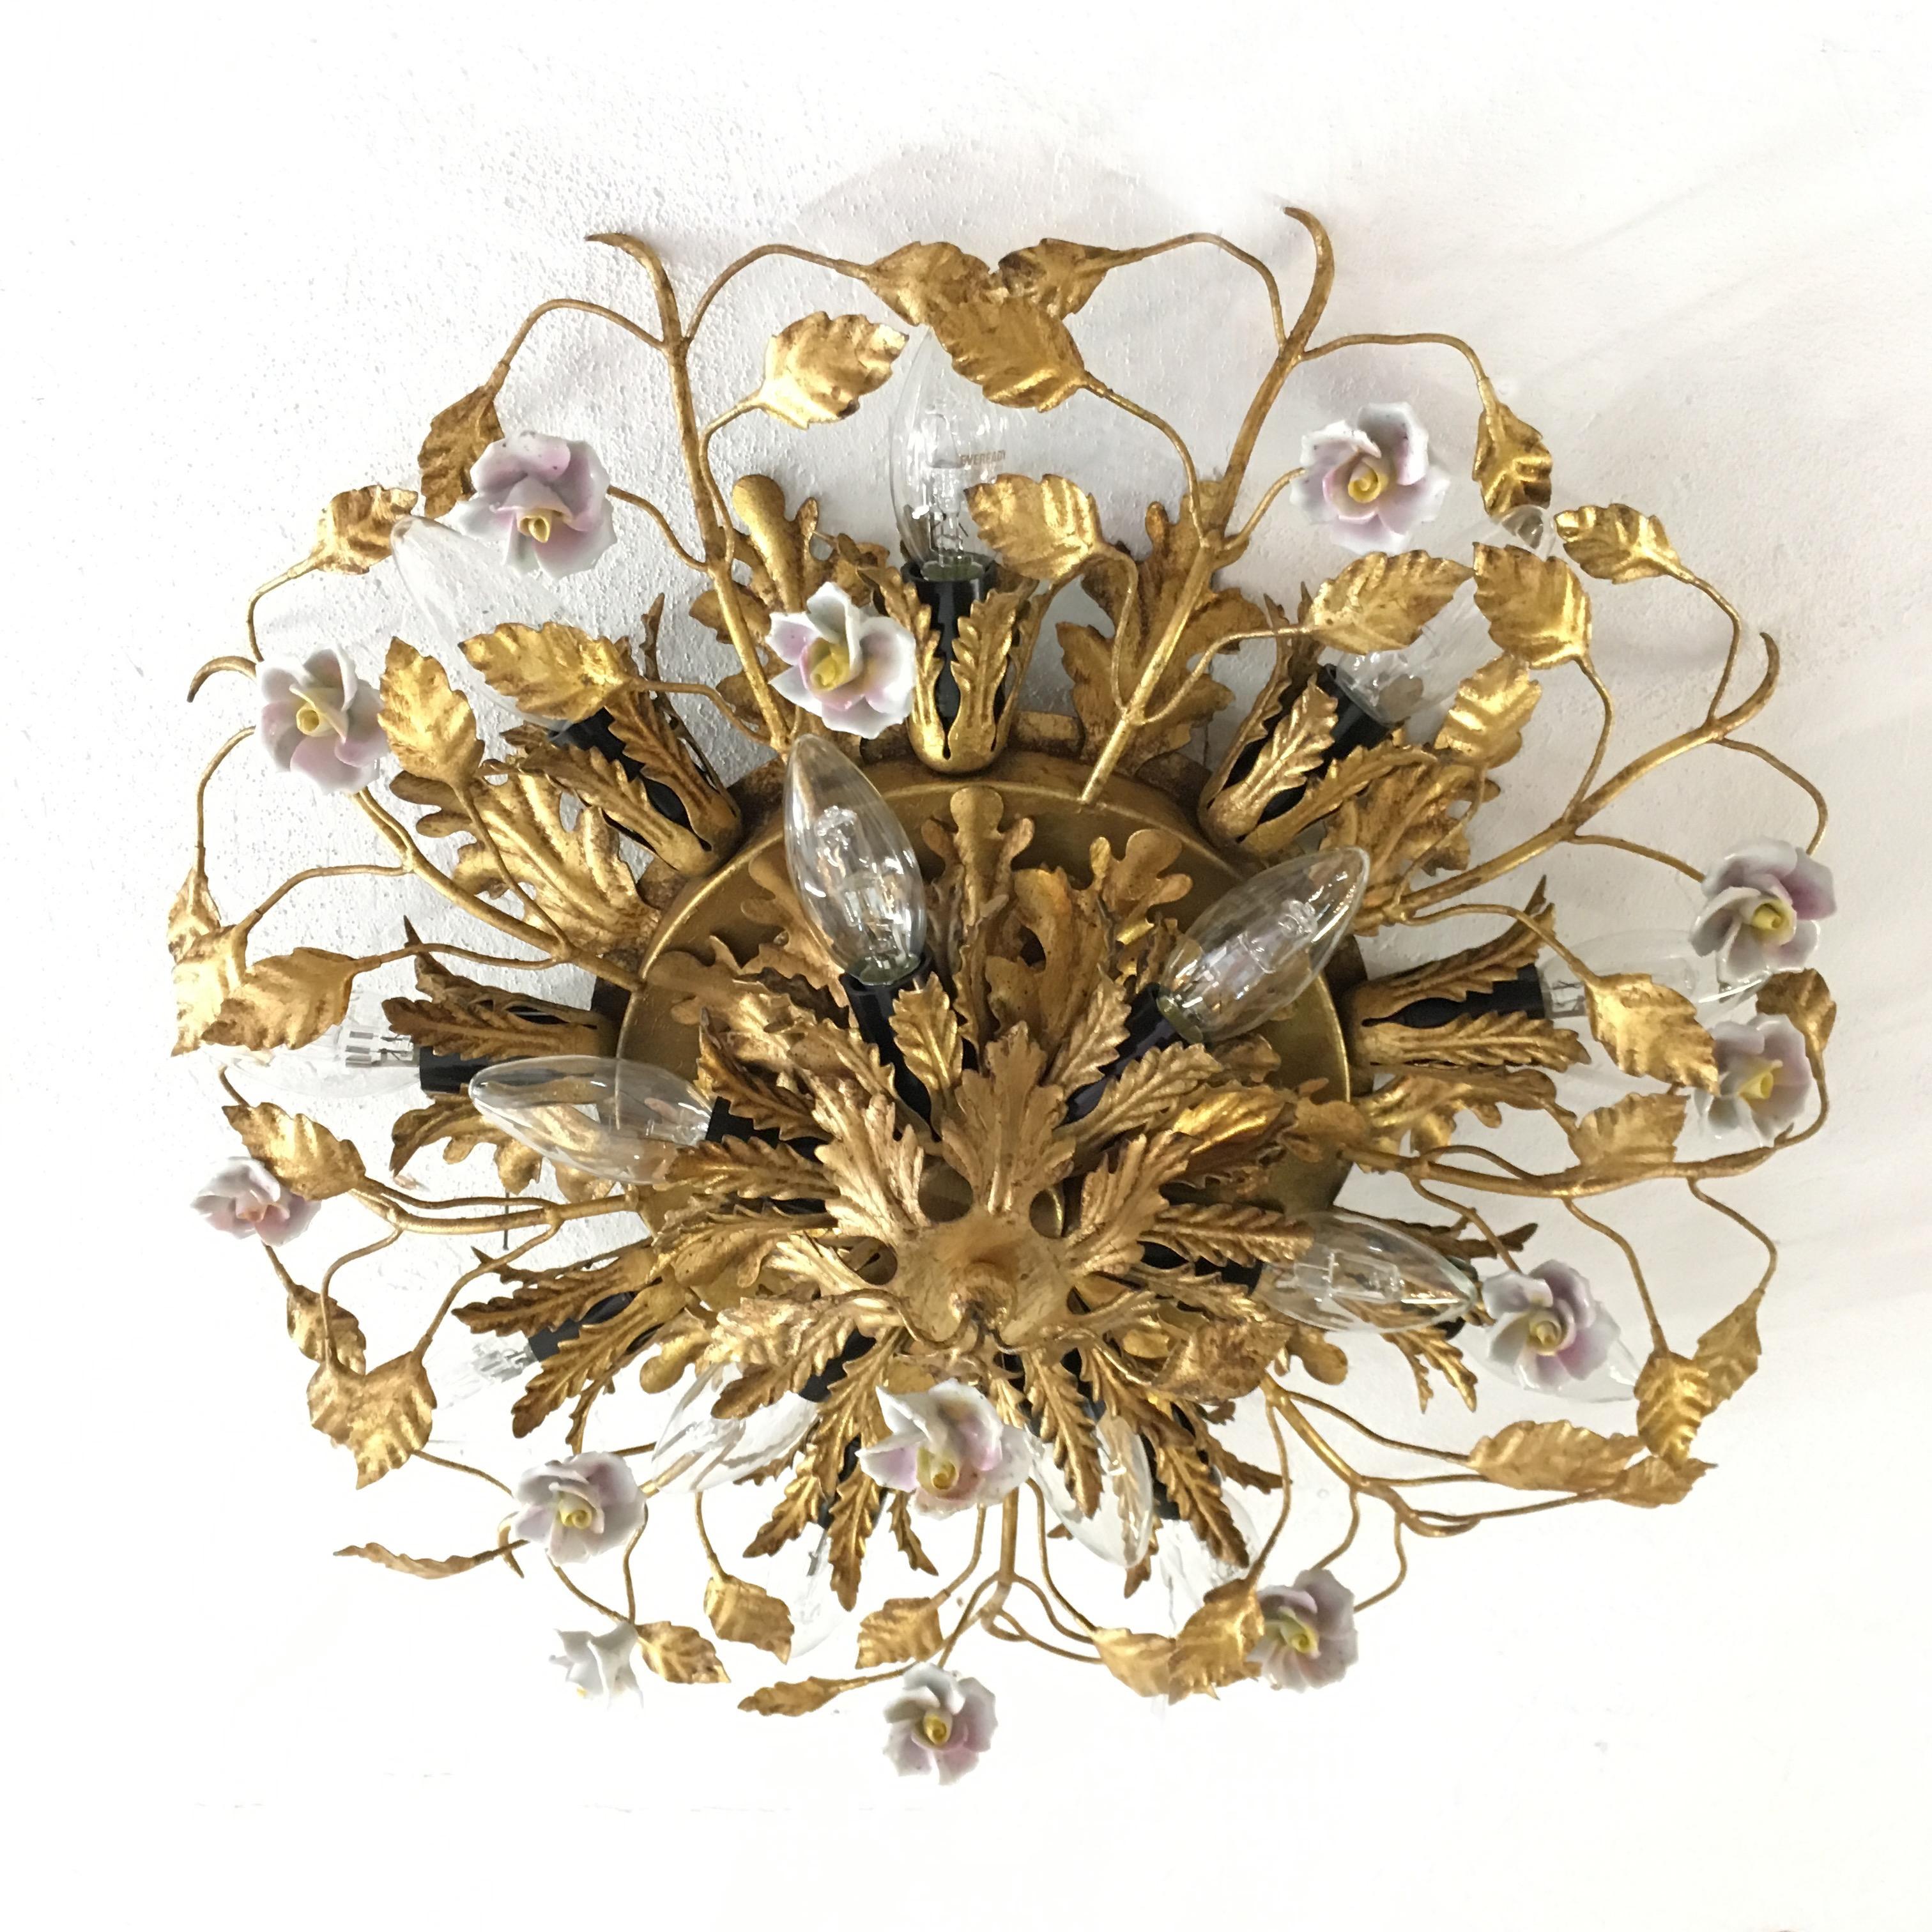 Hand-Crafted Banci Firenze Florentine Ceiling Light with Porcelain Flowers